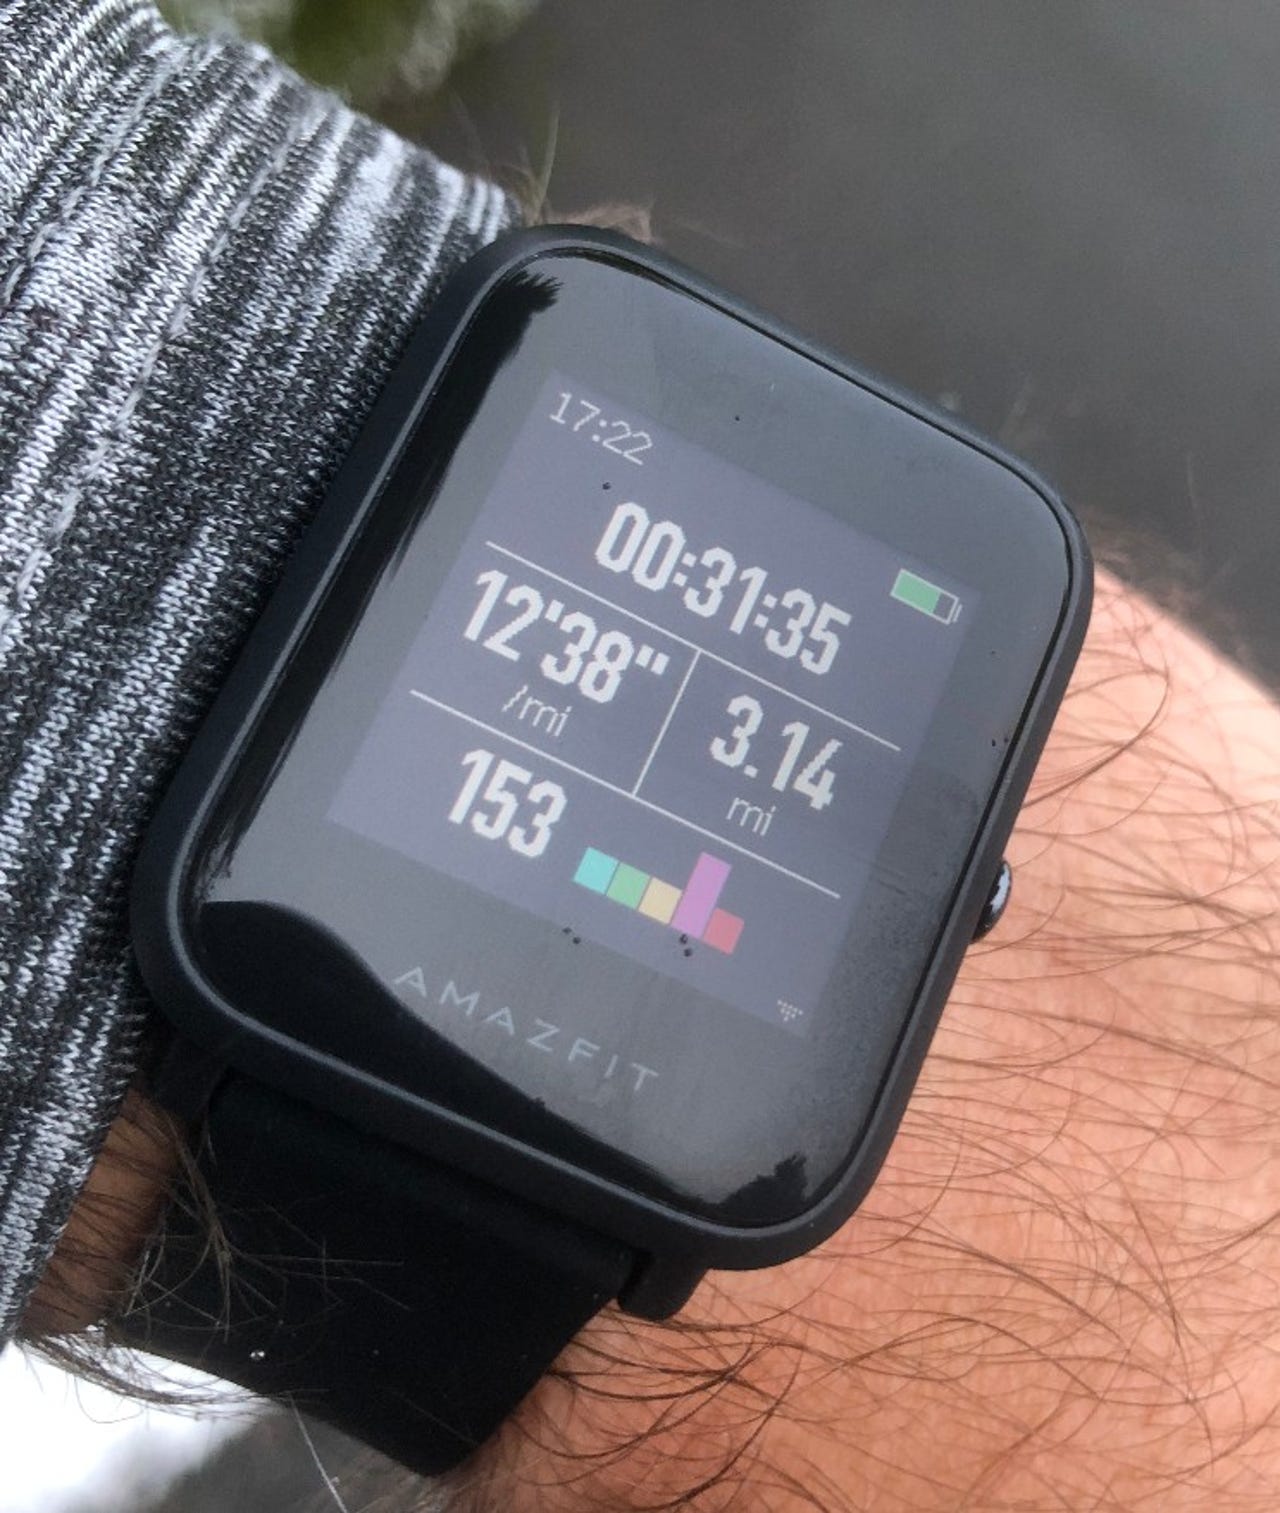 Amazfit Bip 3 Pro: Carry the Gym On Your Wrist